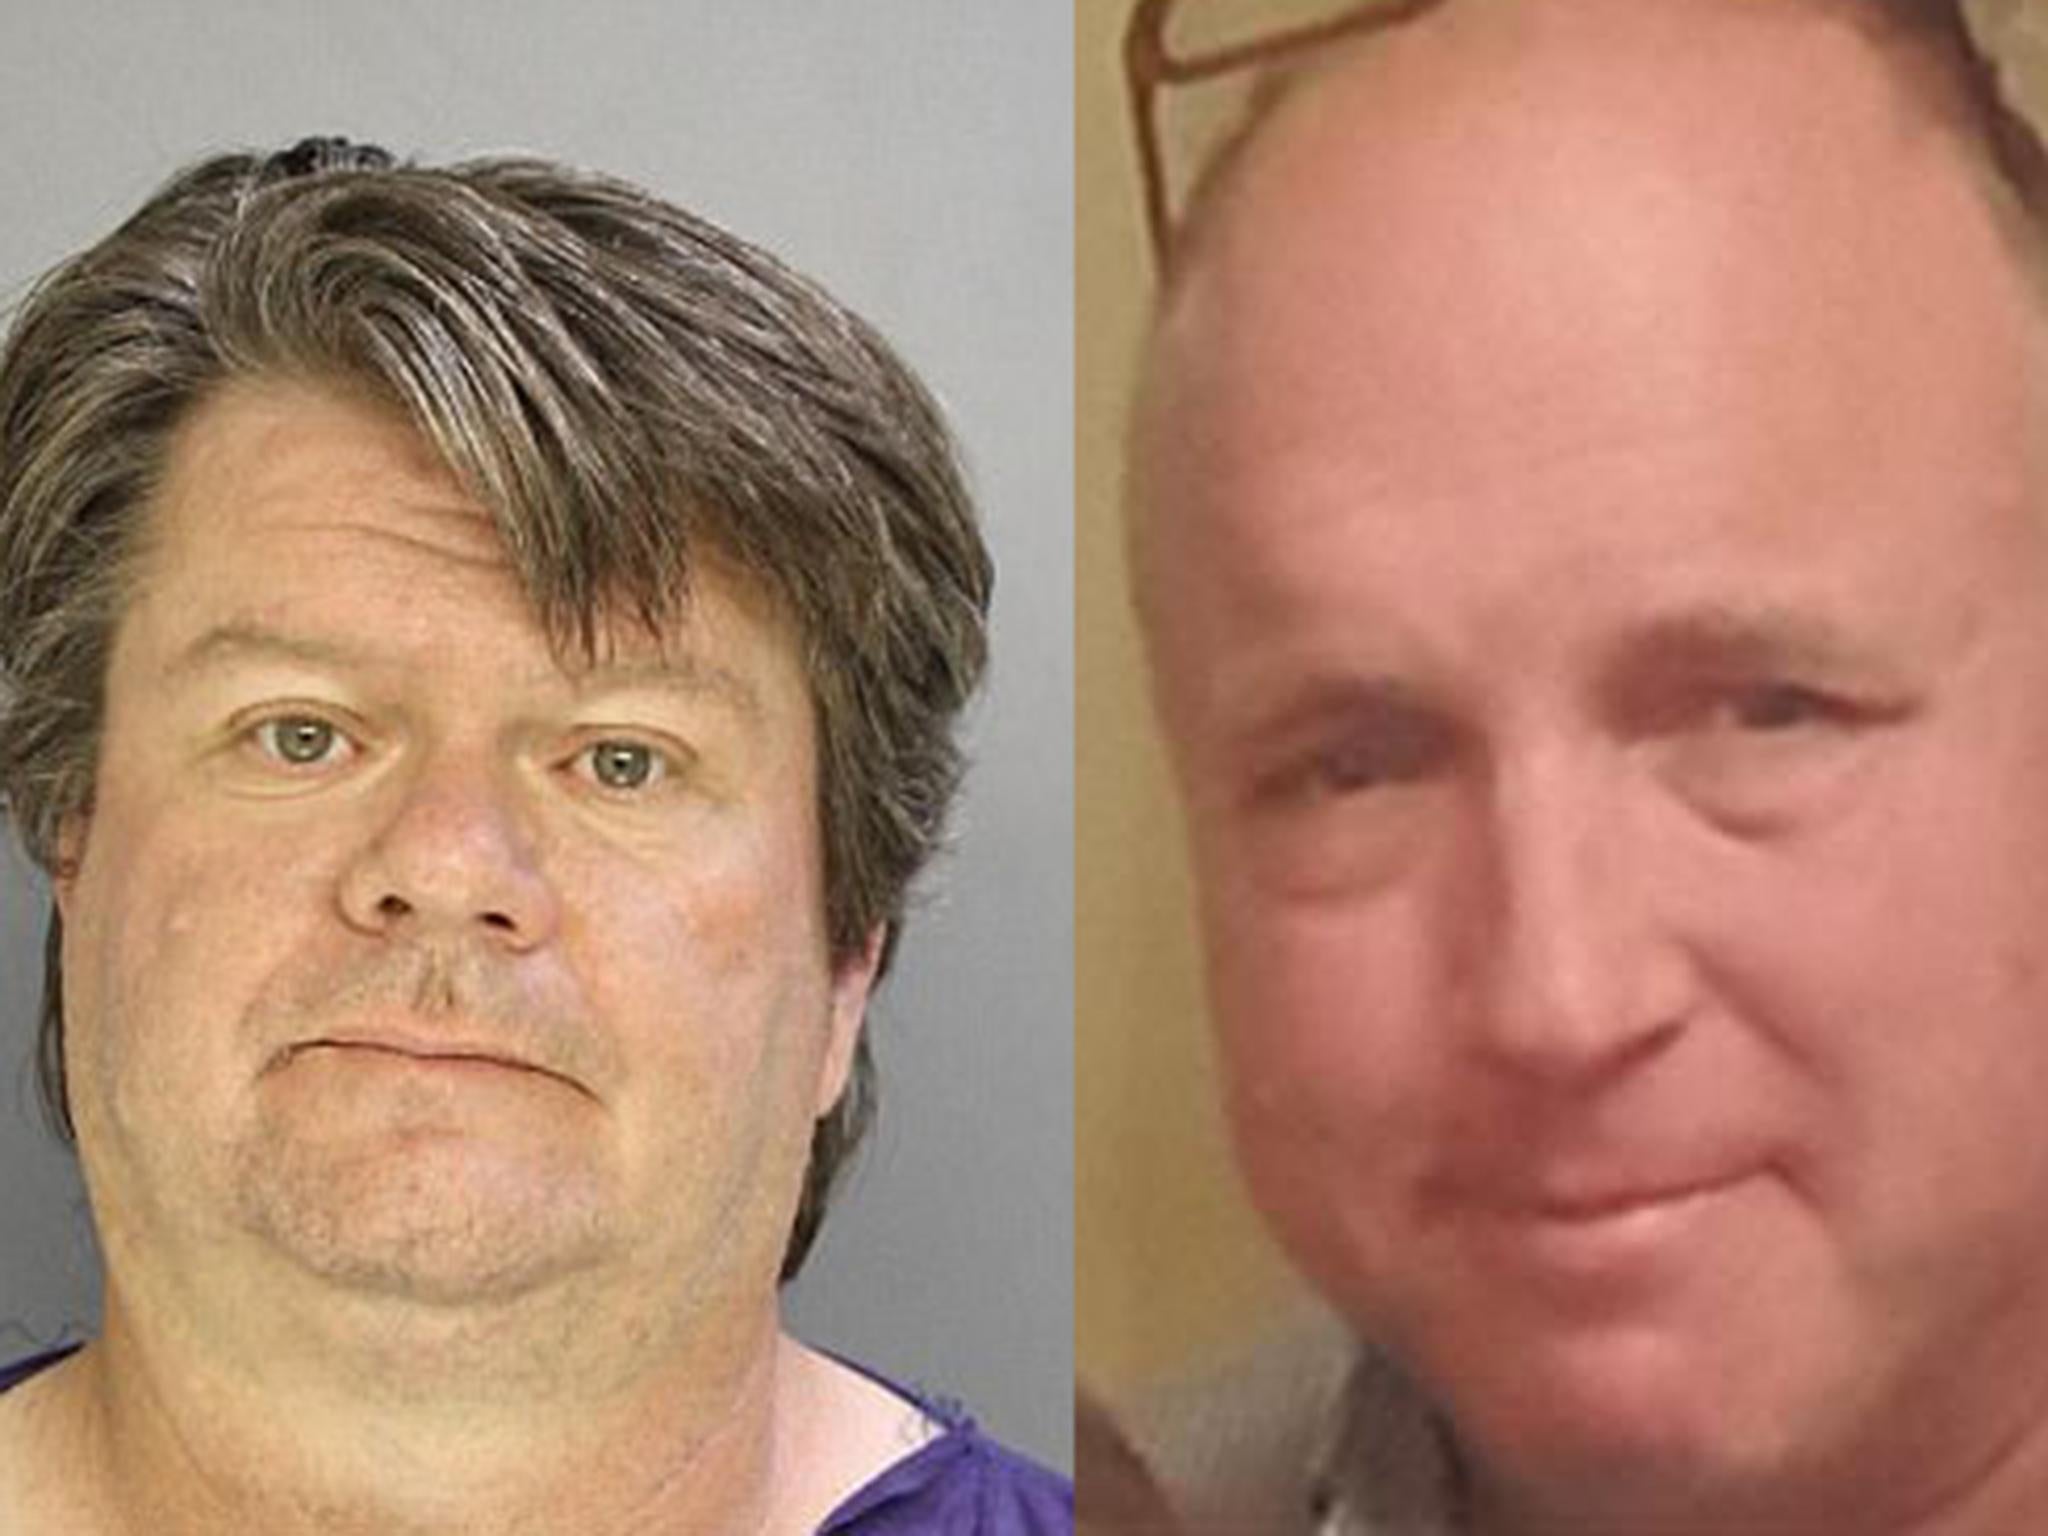 Clayton Carter, left, has been charged with murdering his neighbour George Jennings